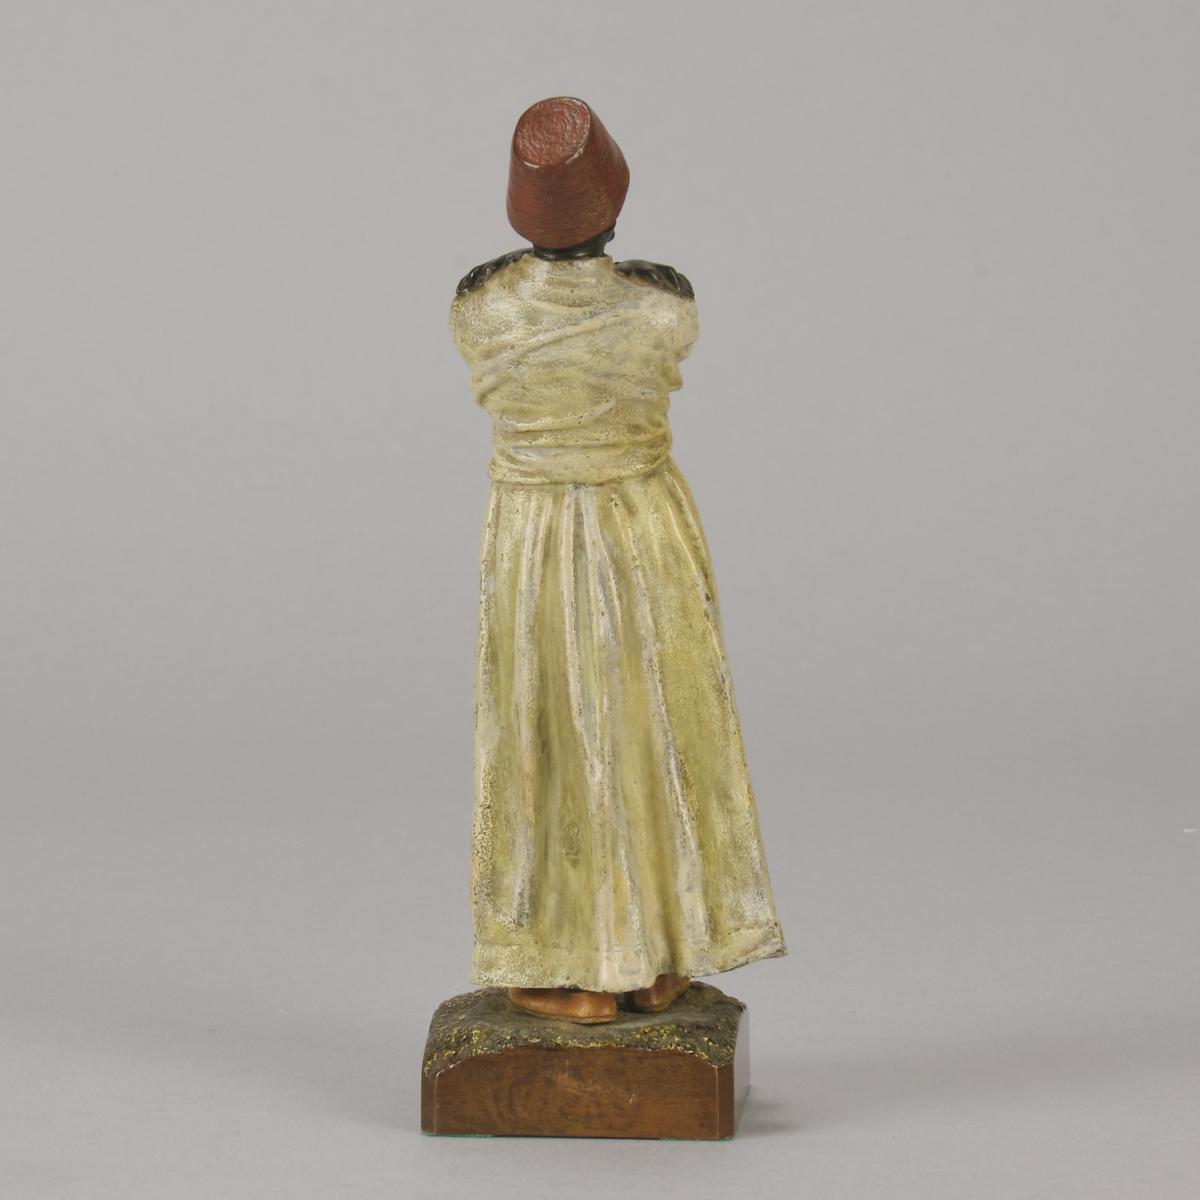 Early 20th Century Orientalist Sculpture"Whirling Dervish 1" by Franz Bergman